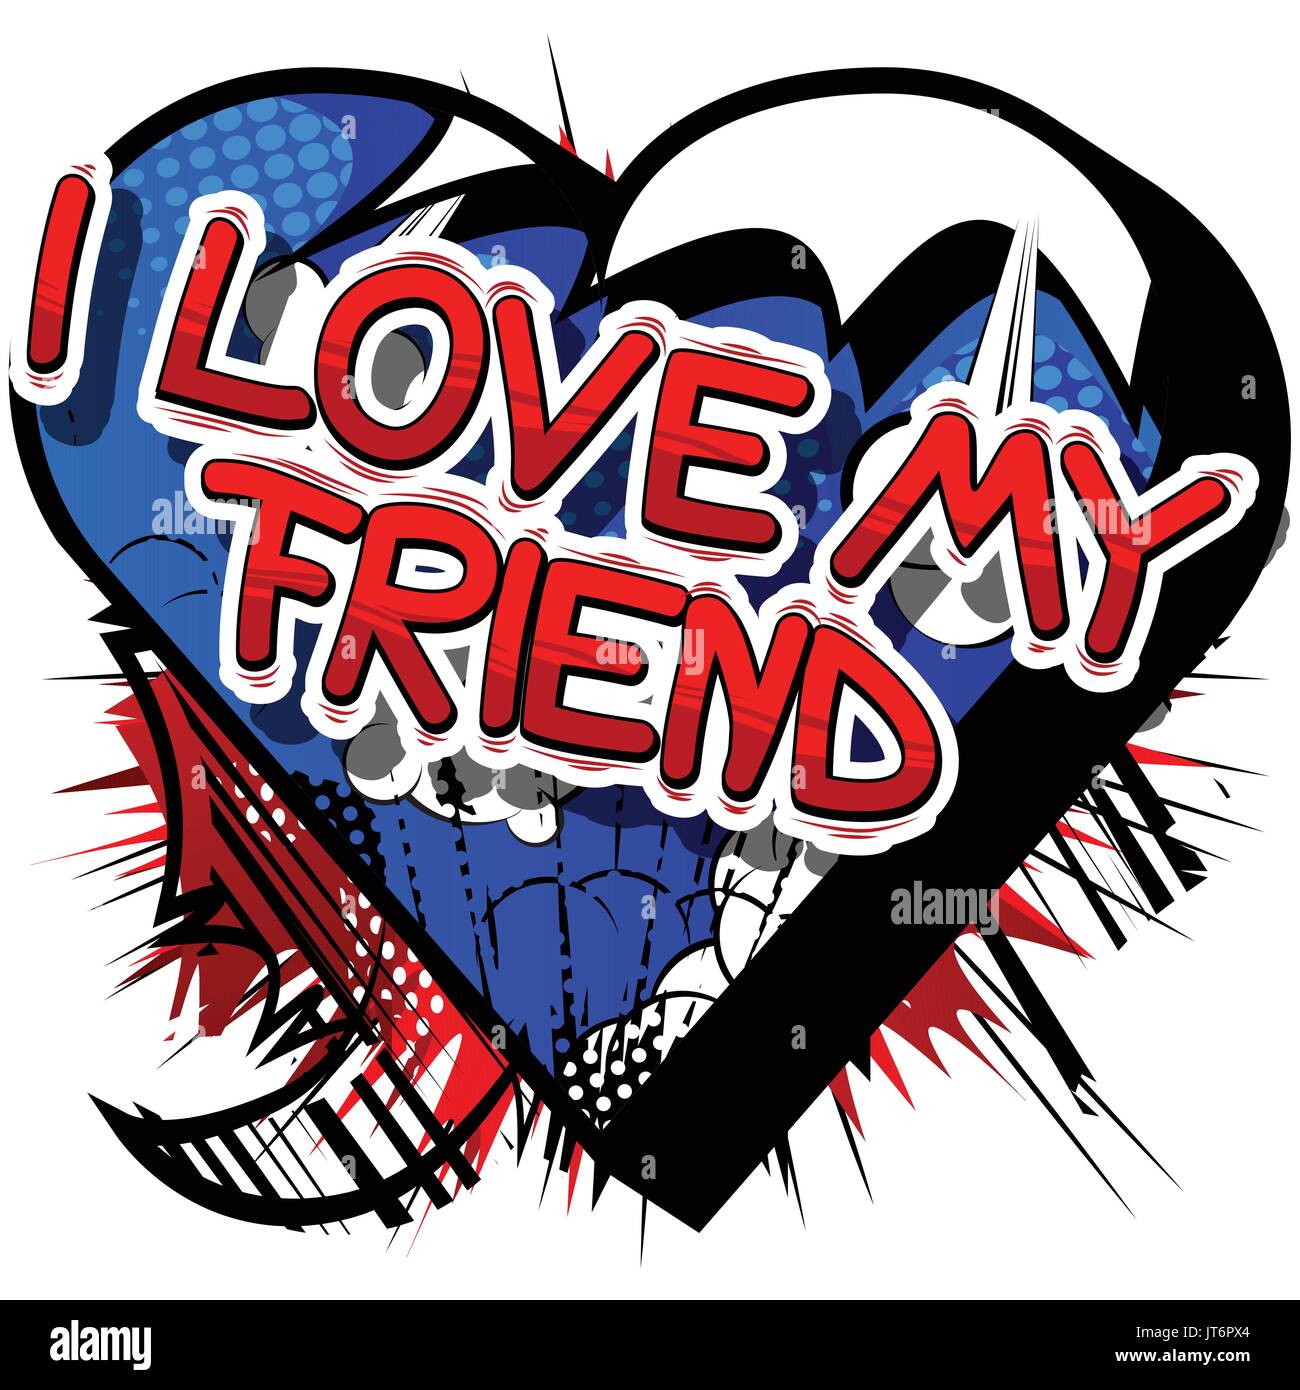 I Love My Friend - Comic book style phrase on abstract background. Stock Vector